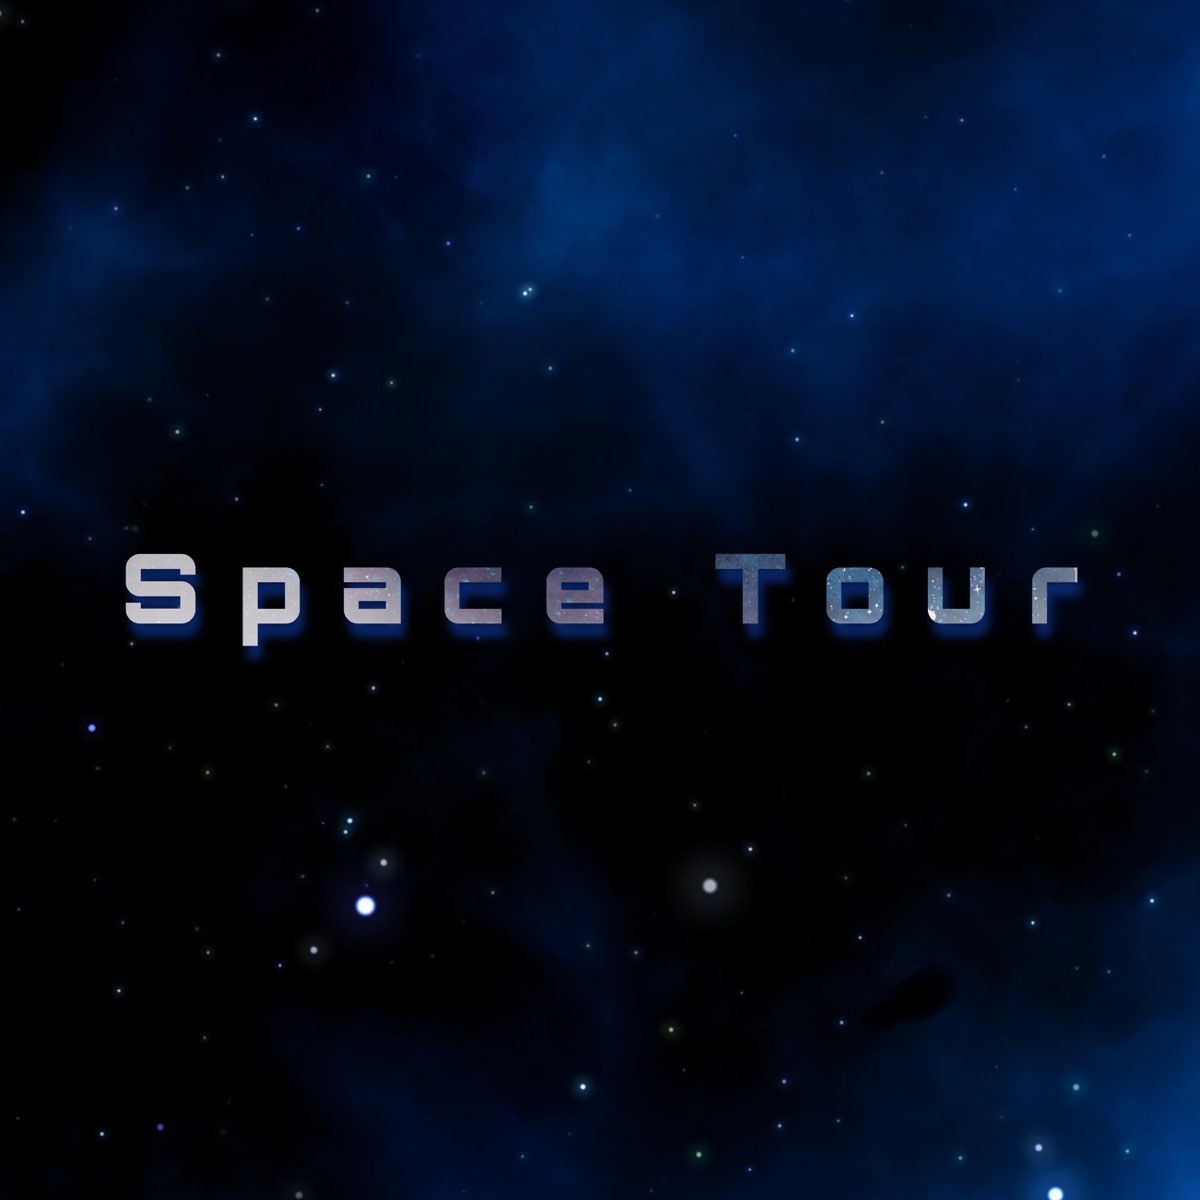 Space 1 песни. Space Tour. Space Song. Space Tours Limited.